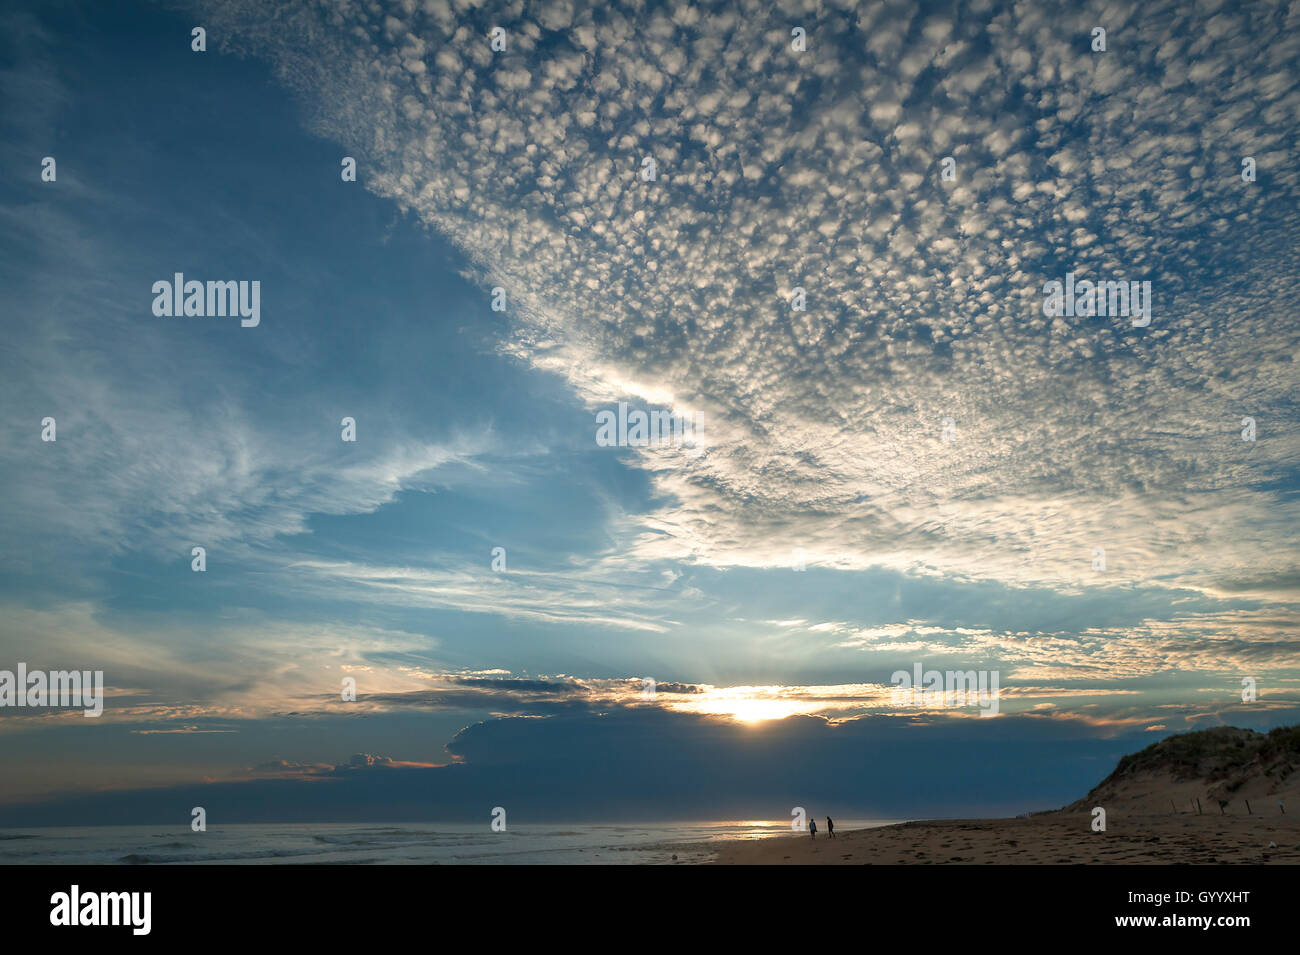 Sunset with small cirrocumulus clouds, herringbone sky, by the Atlantic coast, La Tranche sur Mer Vandee, France Stock Photo